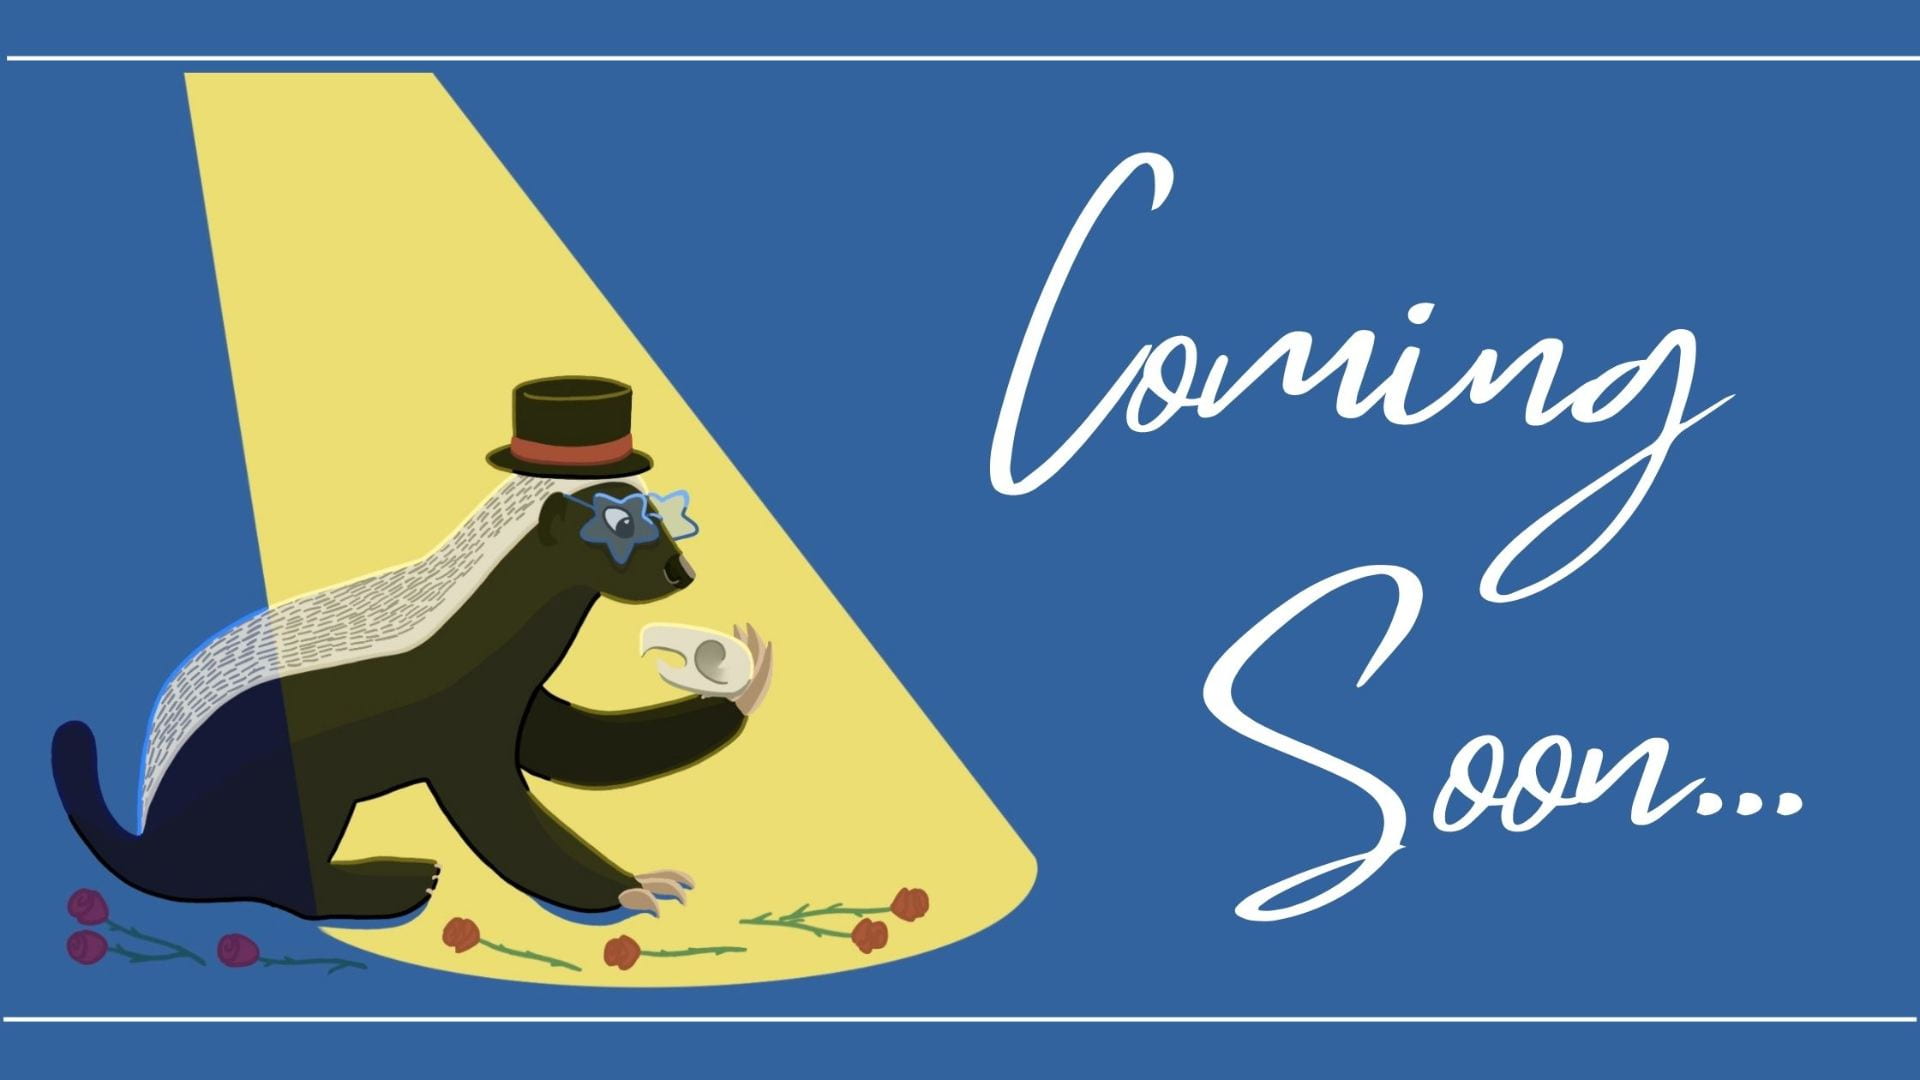 A blue graphic with the words Coming Soon... in white script. On the left side of the graphic is Hanszen Theatre's logo, a honey badger with a top hat sitting in a spotlight. Roses lay at the badger's feet, and it holds an animal skull.